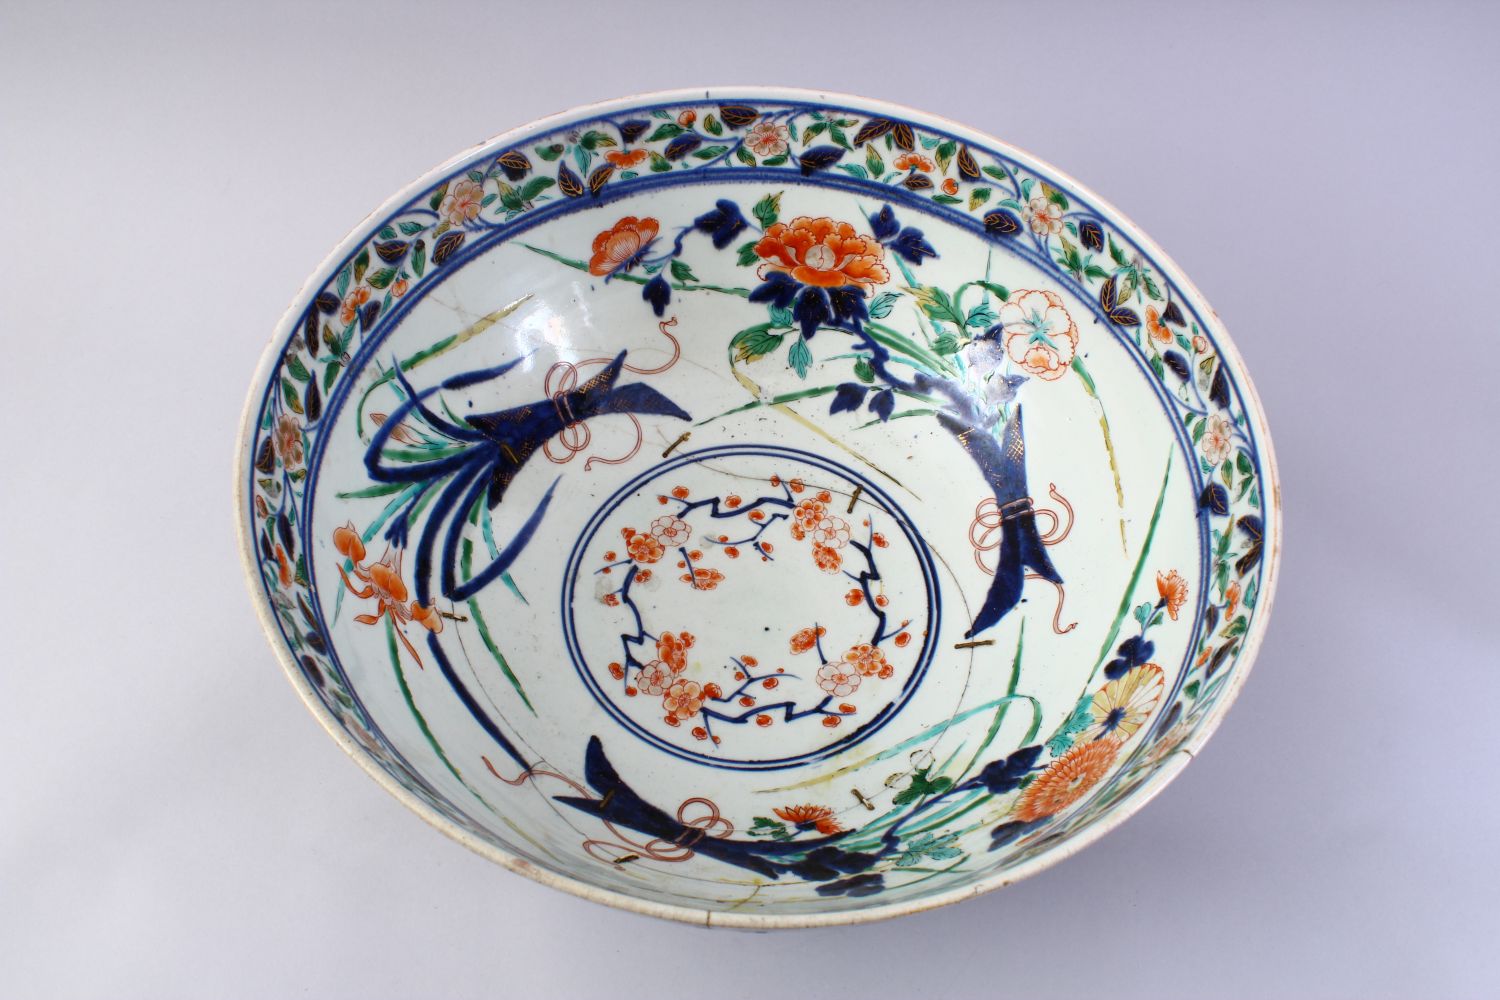 A LARGE JAPANESE MEIJI PERIOD IMARI PORCELAIN BOWL, decorated with typical imari palate, with staple - Image 5 of 6